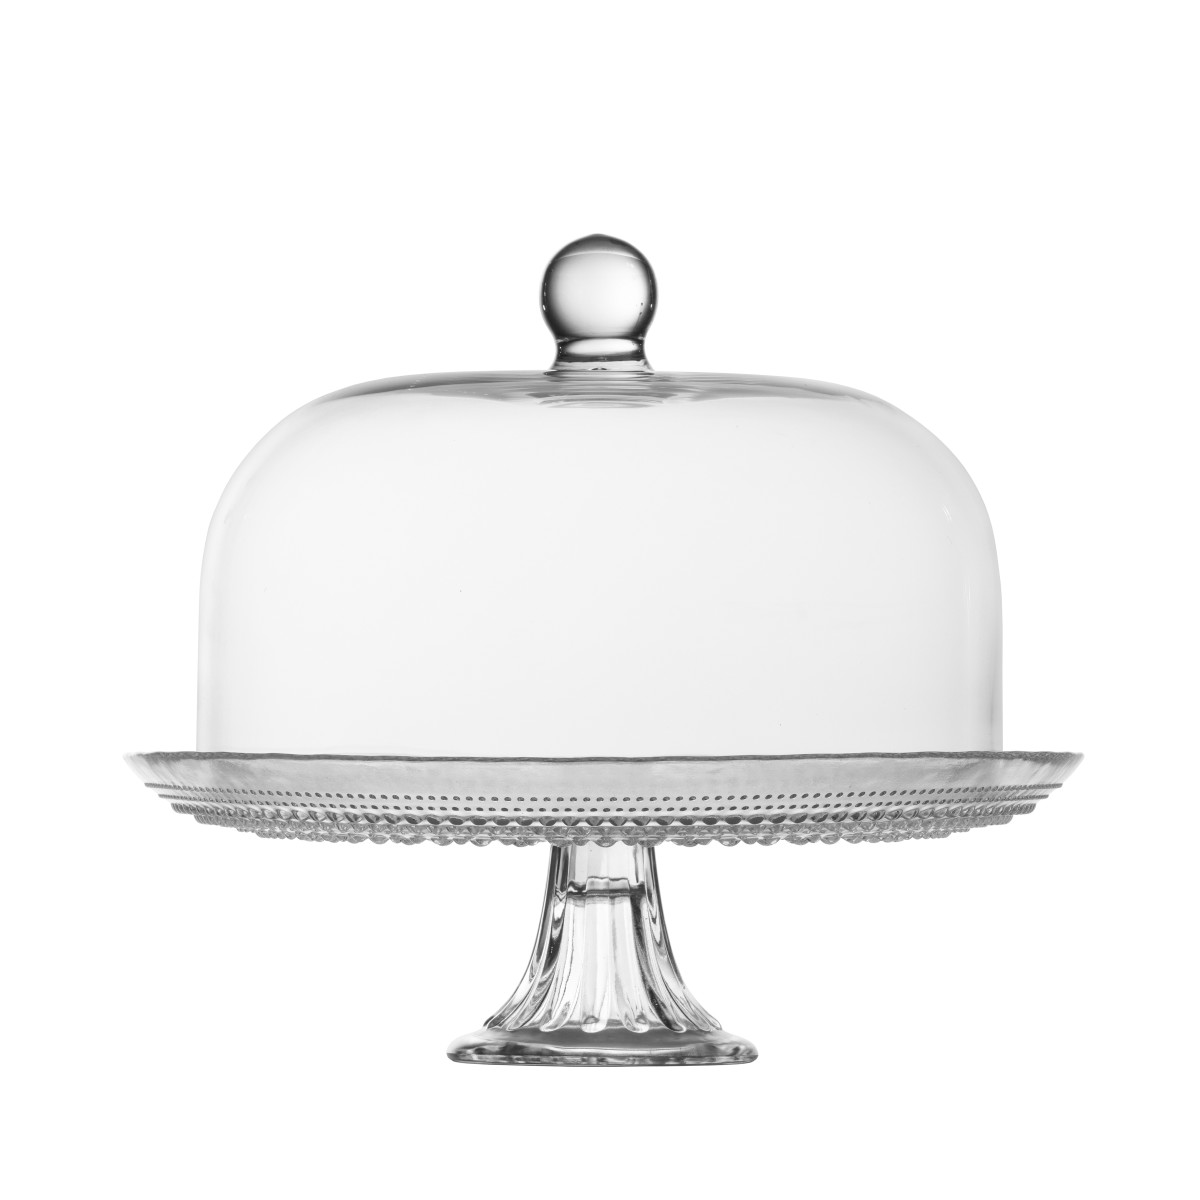 Jupiter Clear 13" Cake Stand and Dome Set